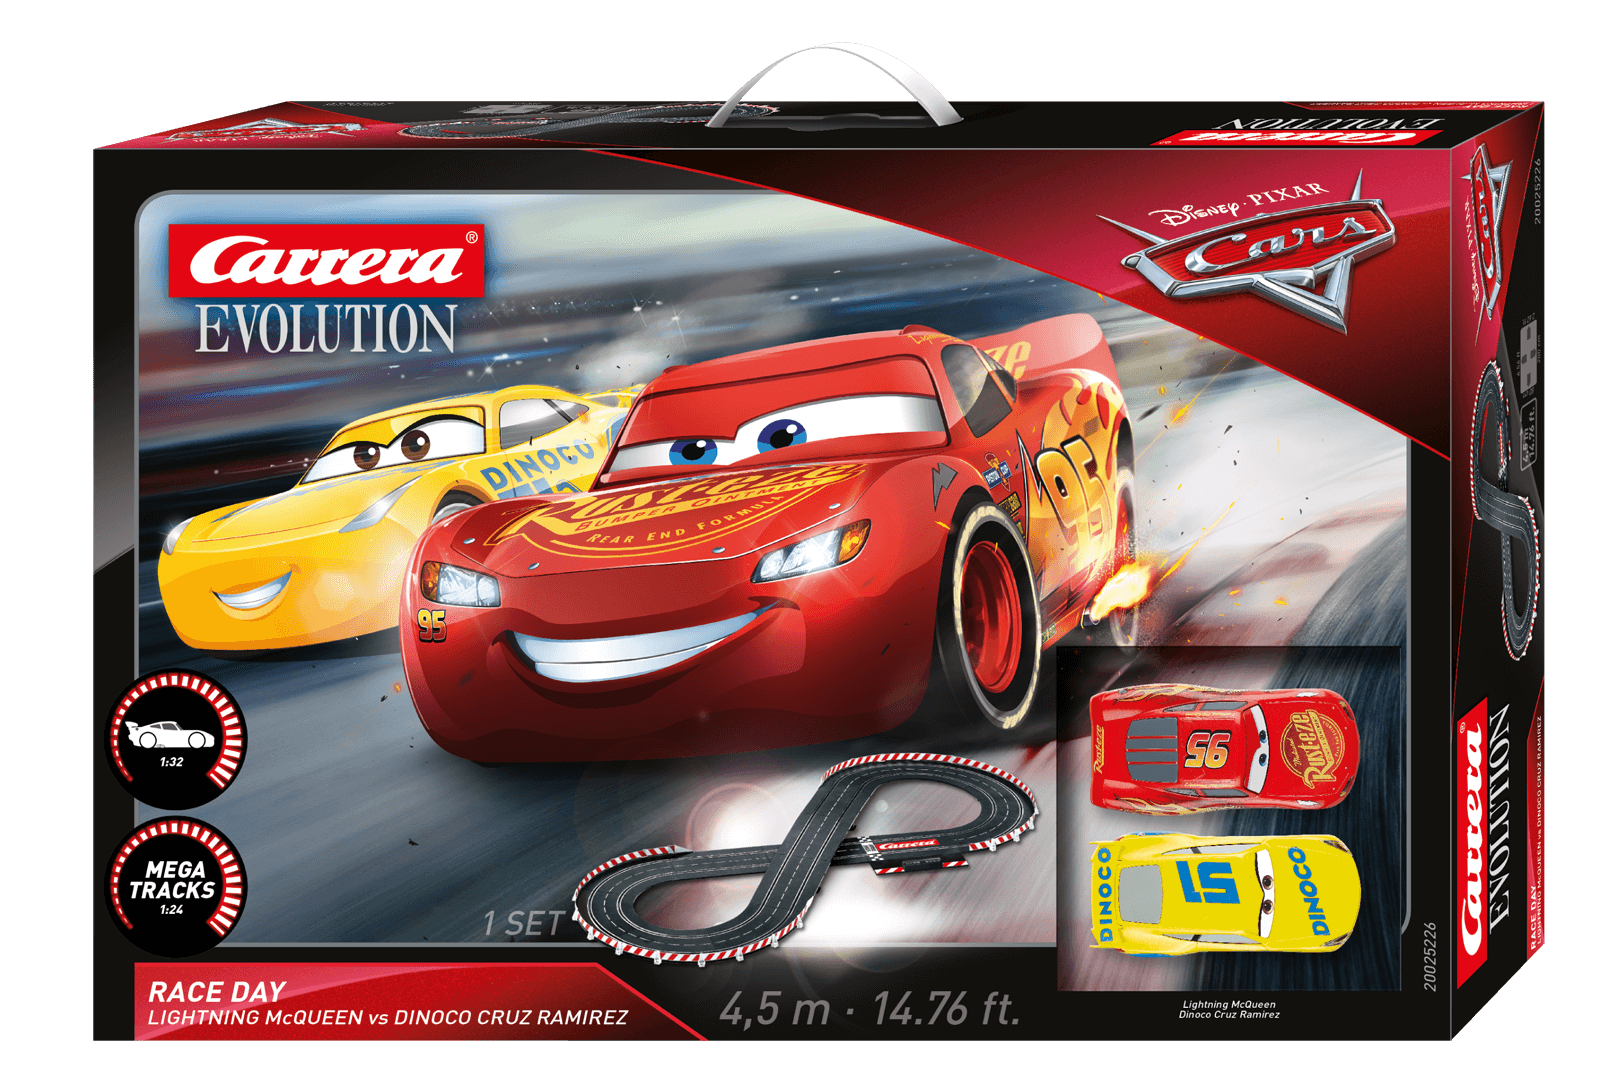 Carrera Evolution 1:32 scale Race Sets with 1:24 scale Track!!!